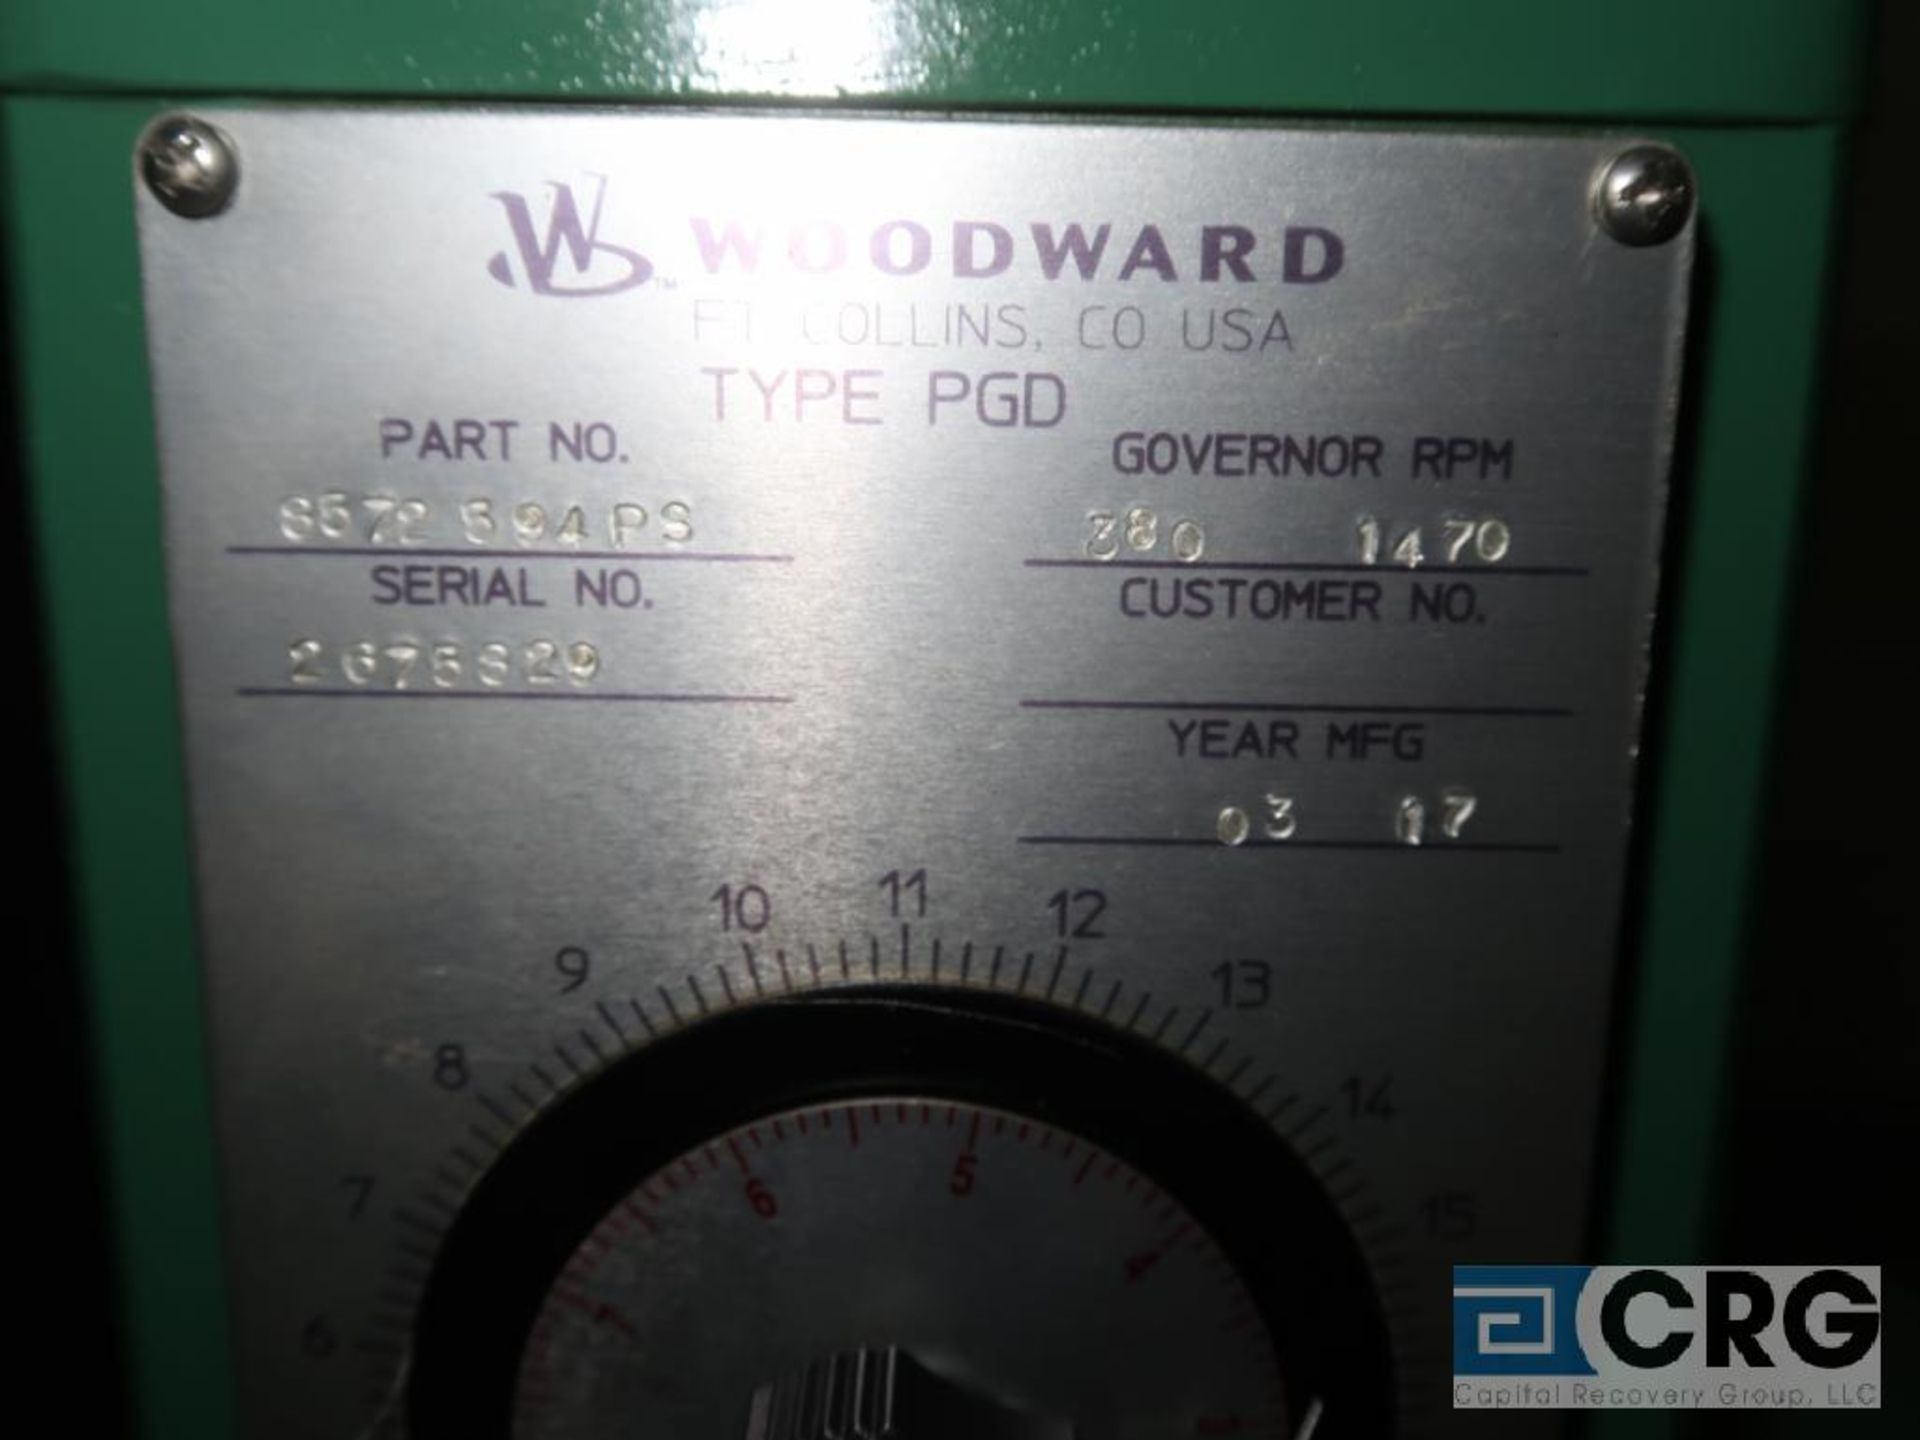 Woodward PDG govenor, 380-1,470 RPM, s/n 2675829 (Finish Building) - Image 2 of 2